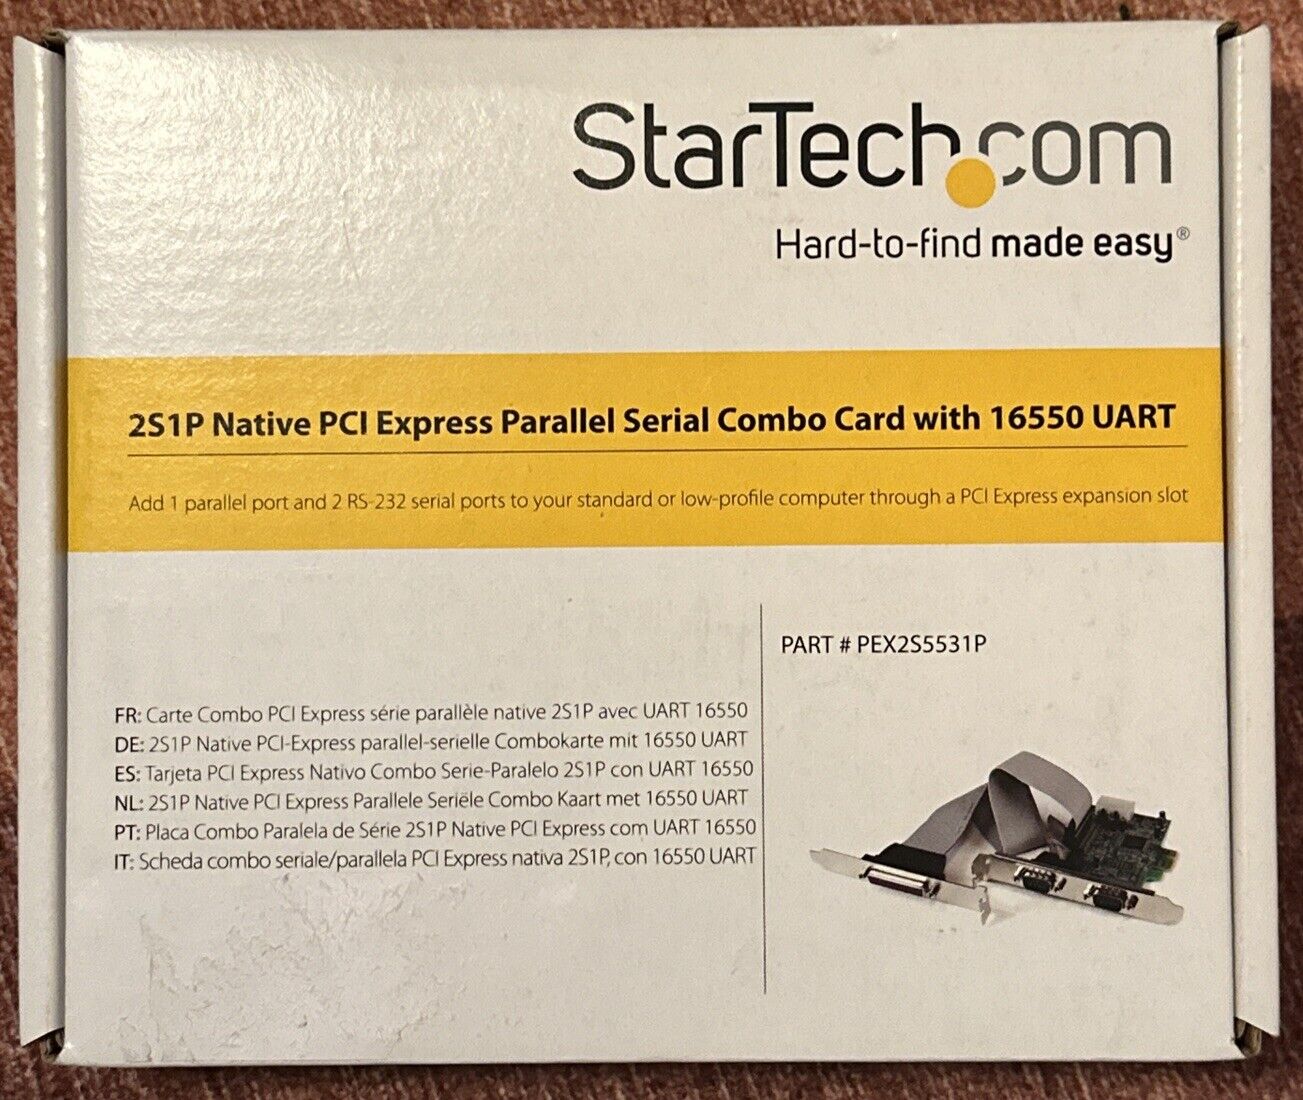 StarTech PEX2S5531P Native PCI Express Parallel Serial ComboCard with 16550 UART